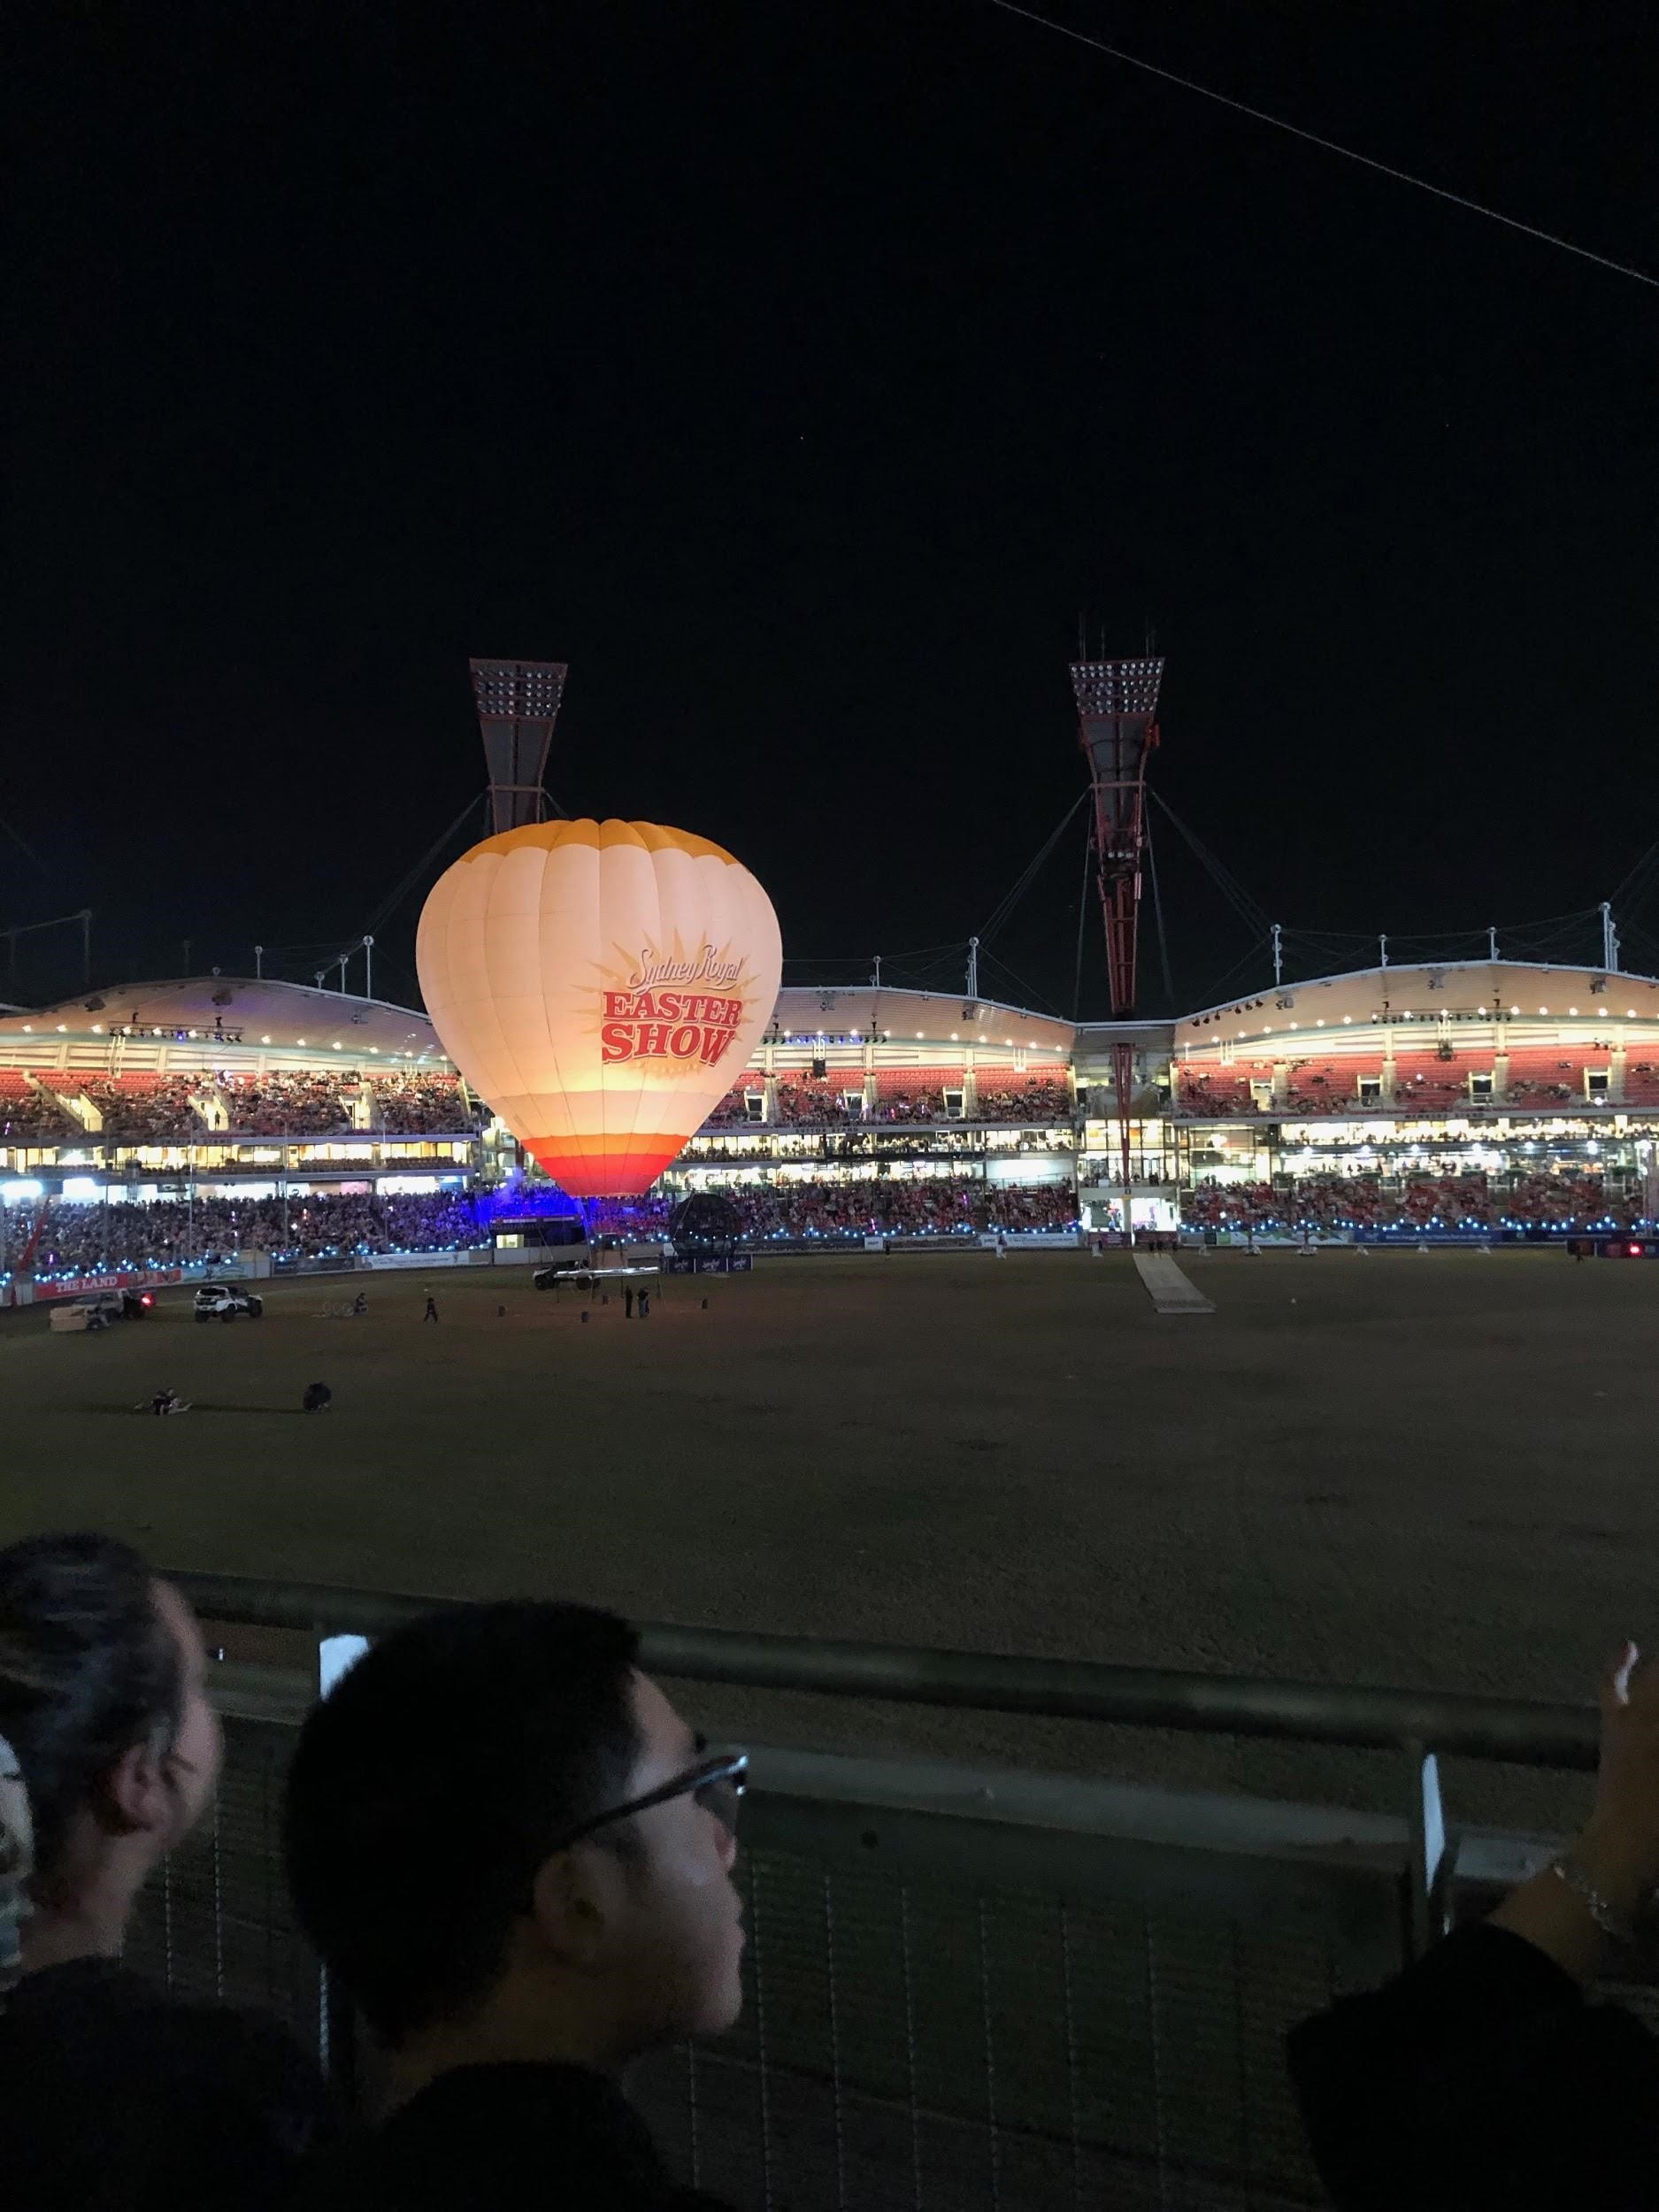 Hot air balloon on grass in stadium at night with bleachers and lights in background